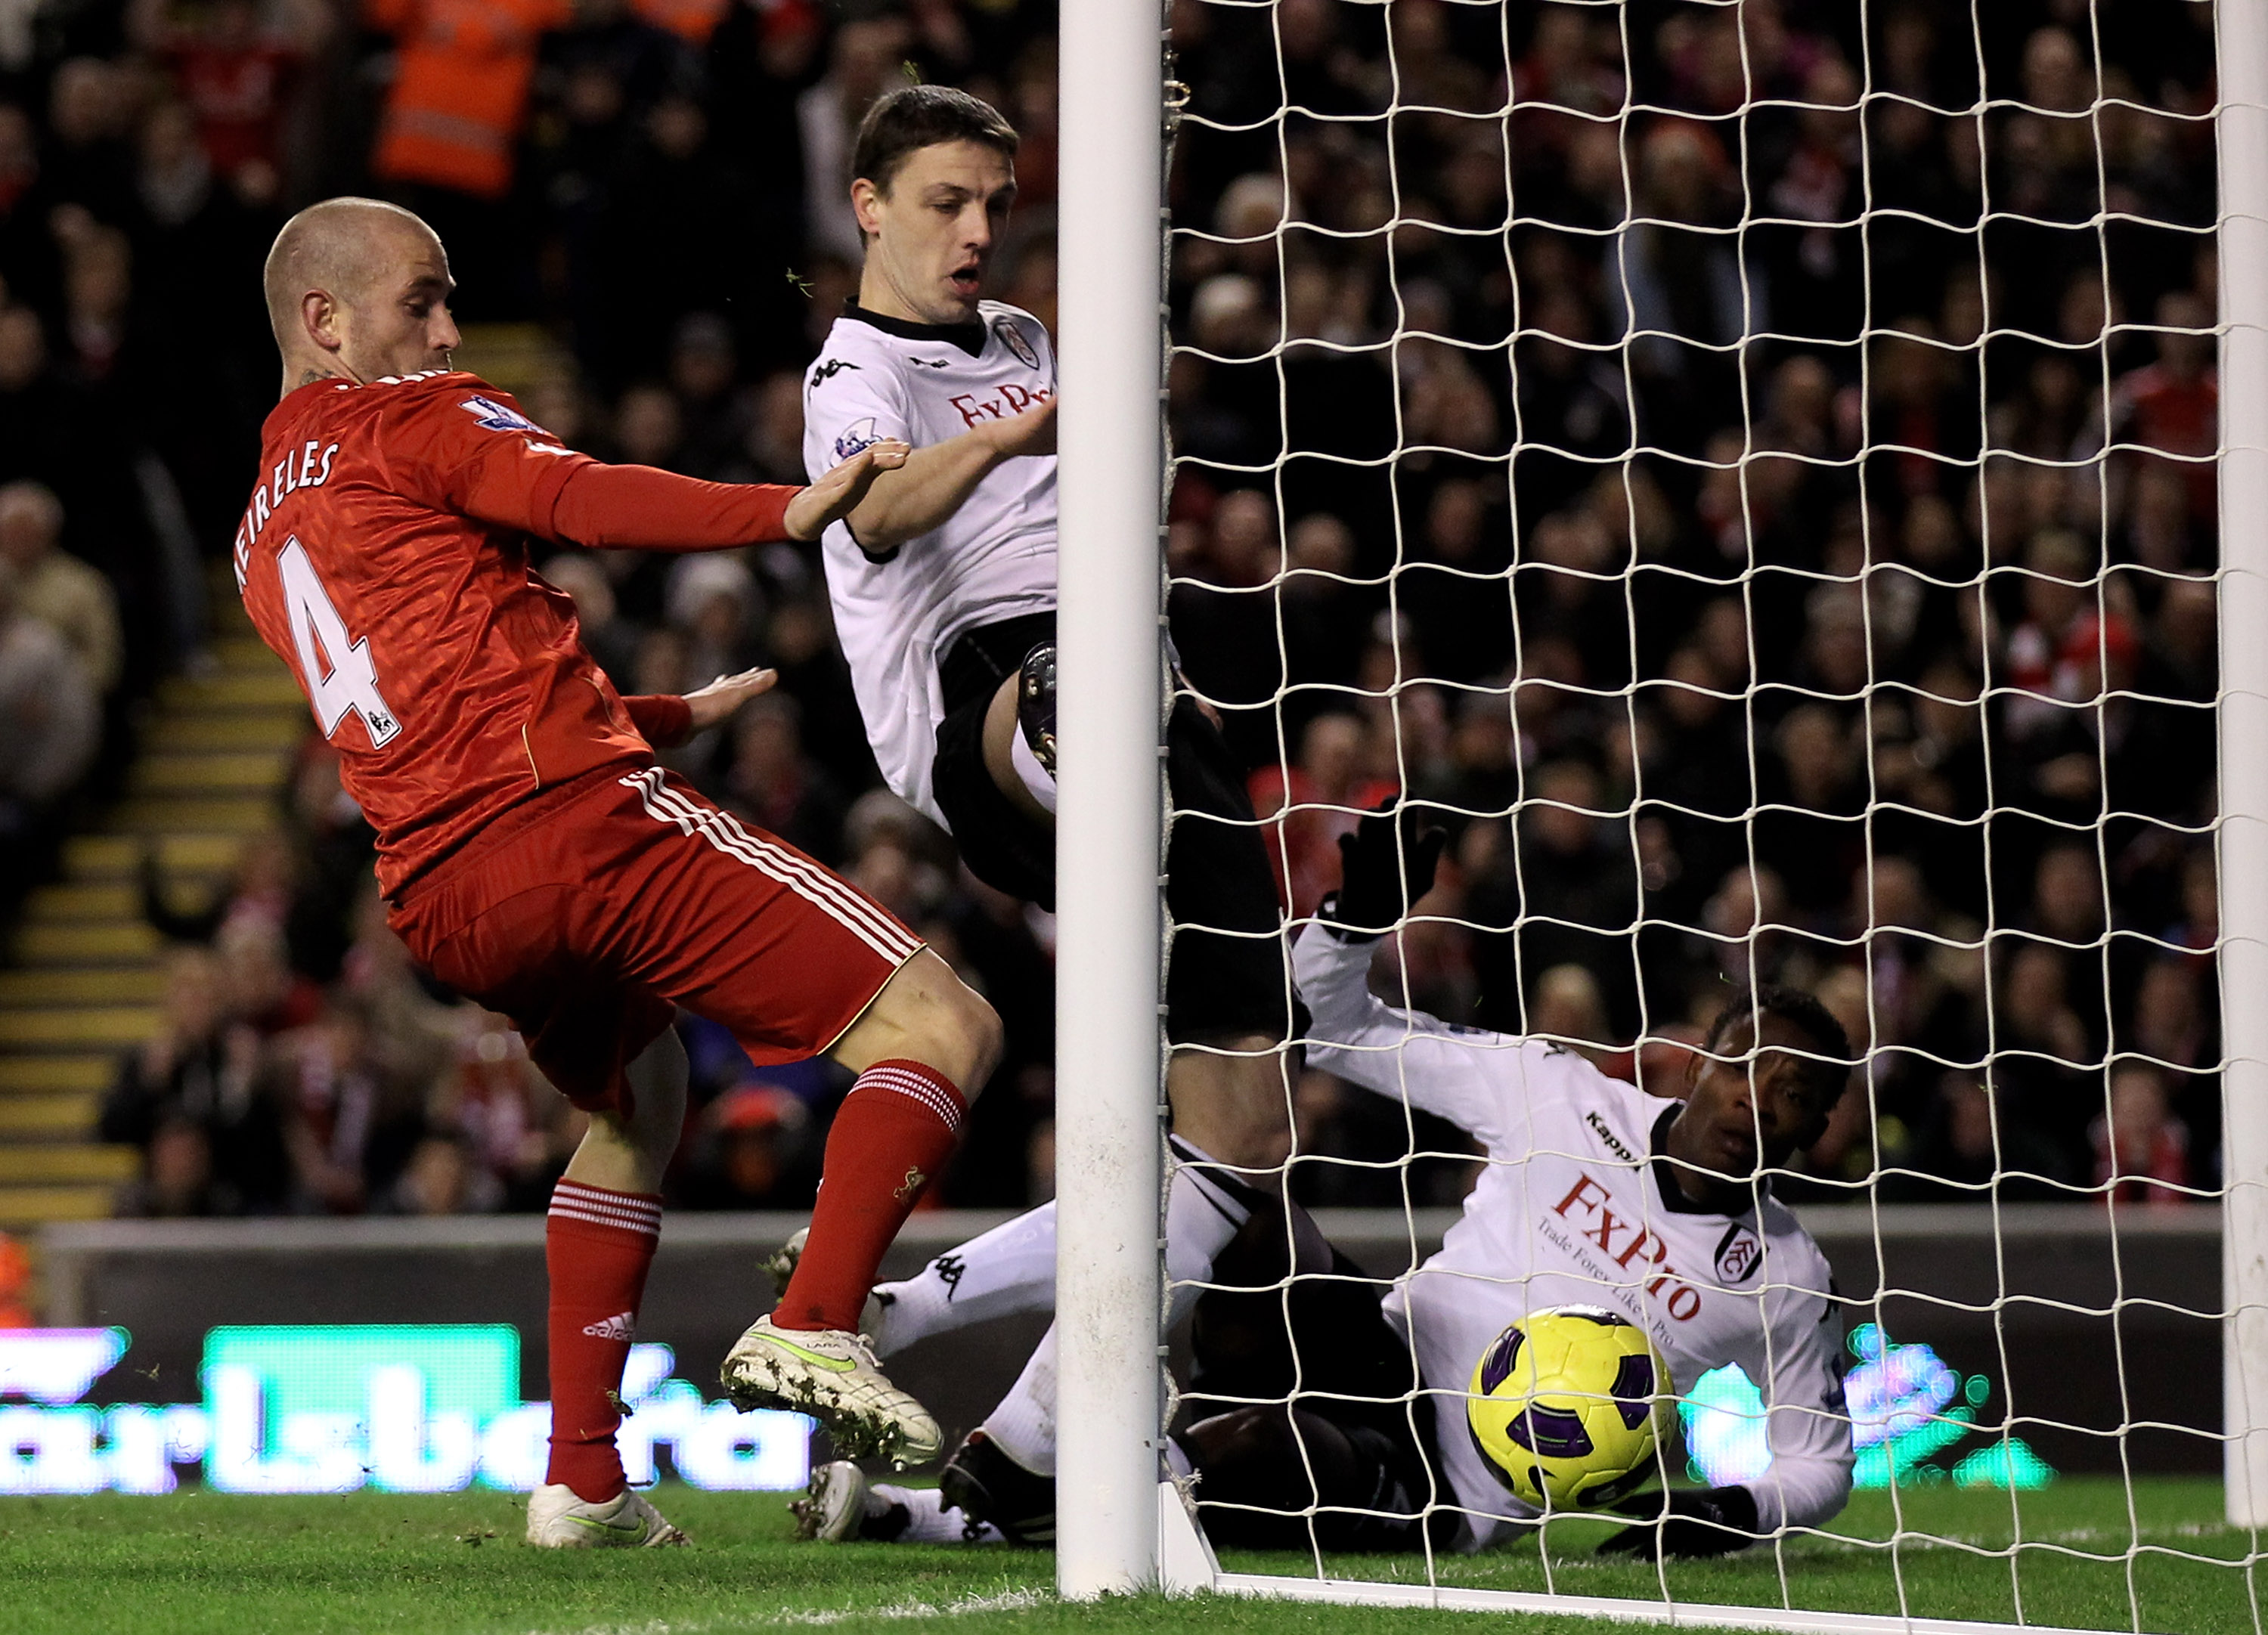 LIVERPOOL, ENGLAND - JANUARY 26:  John Pantsil of Fulham scores an own goal during the Barclays Premier League match between Liverpool and Fulham at Anfield on January 26, 2011 in Liverpool, England.  (Photo by Alex Livesey/Getty Images)